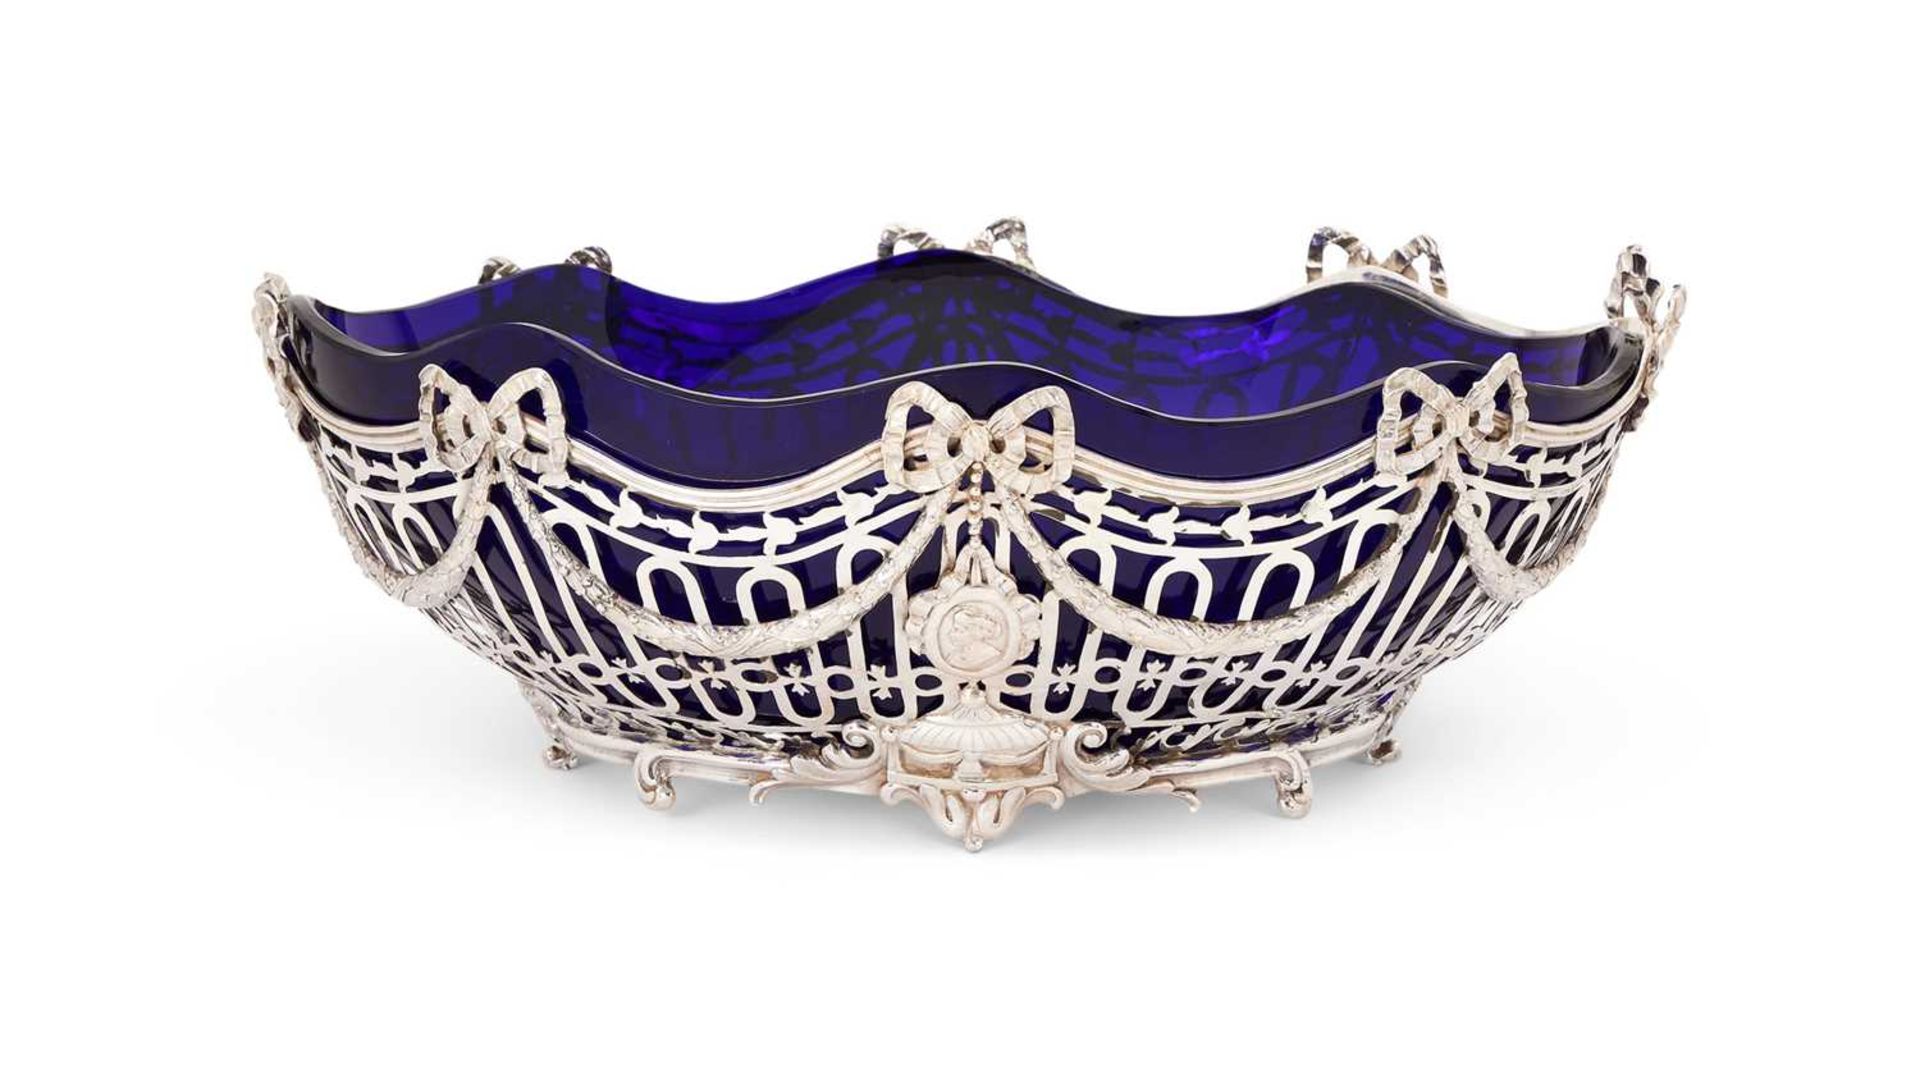 A LARGE LATE 19TH CENTURY GERMAN SILVER AND BLUE GLASS CENTREPIECE